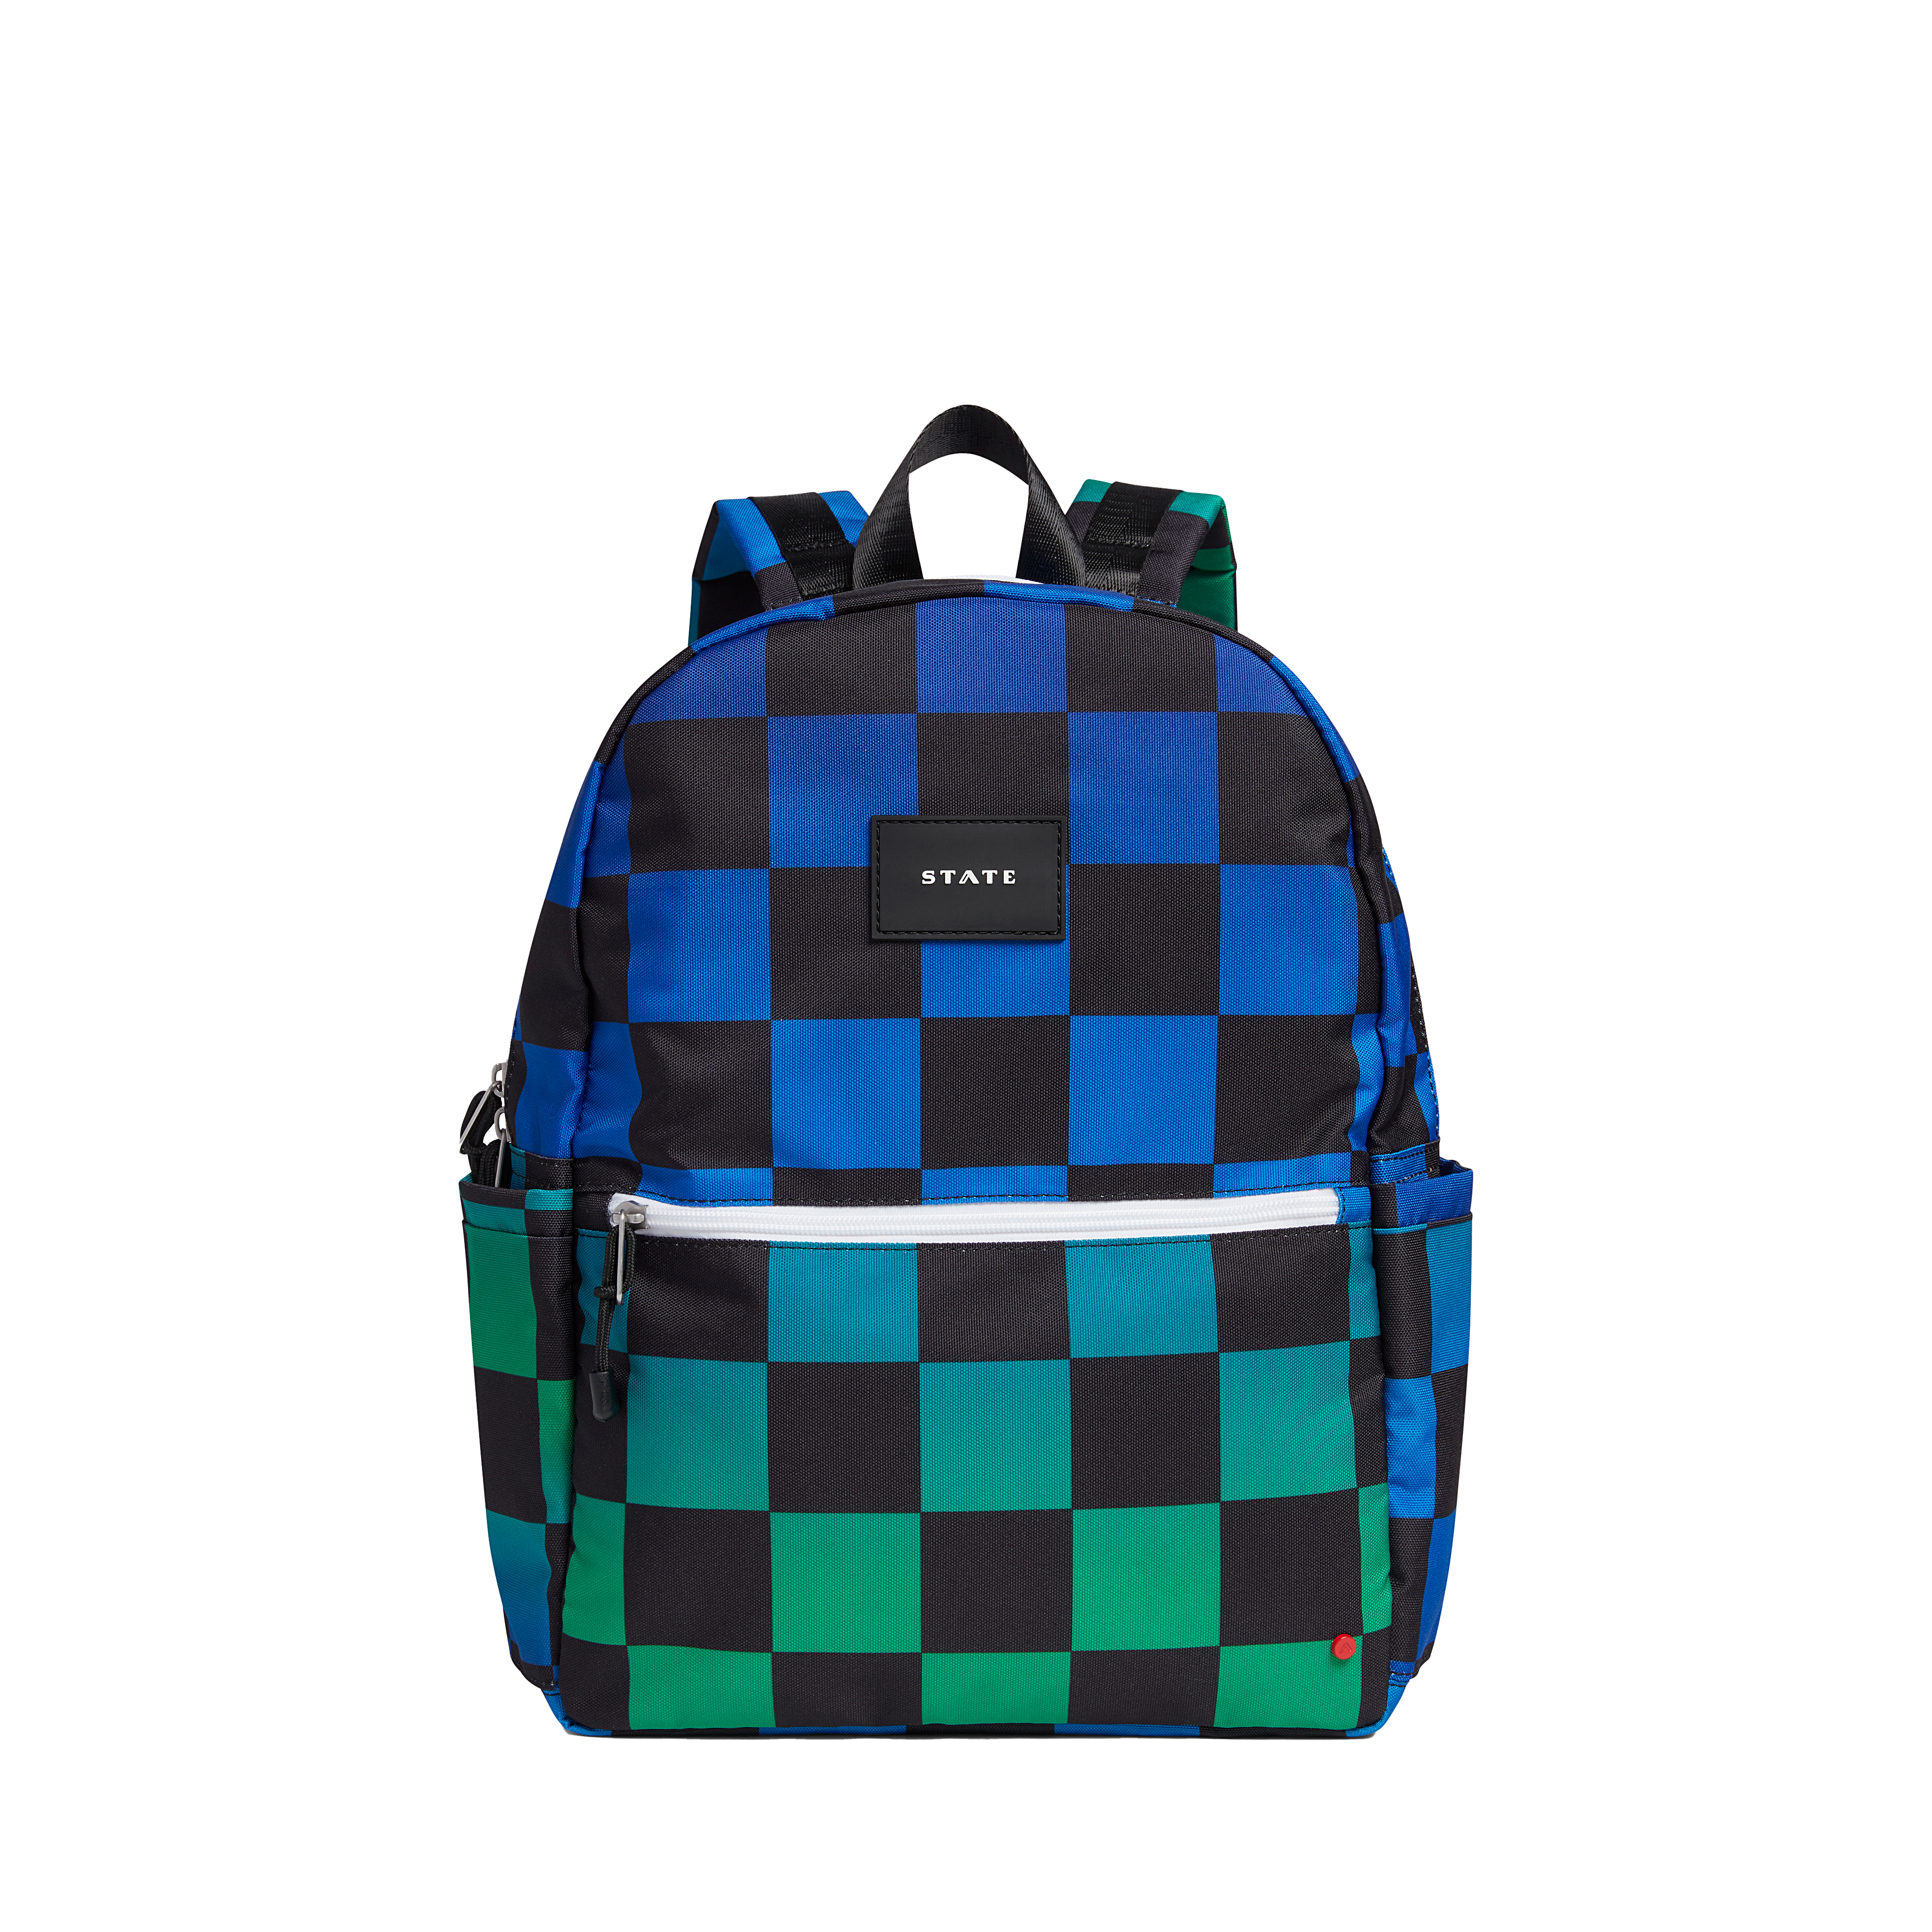 Large Fabric Halfmoon Backpack - Large Checkerboard Print